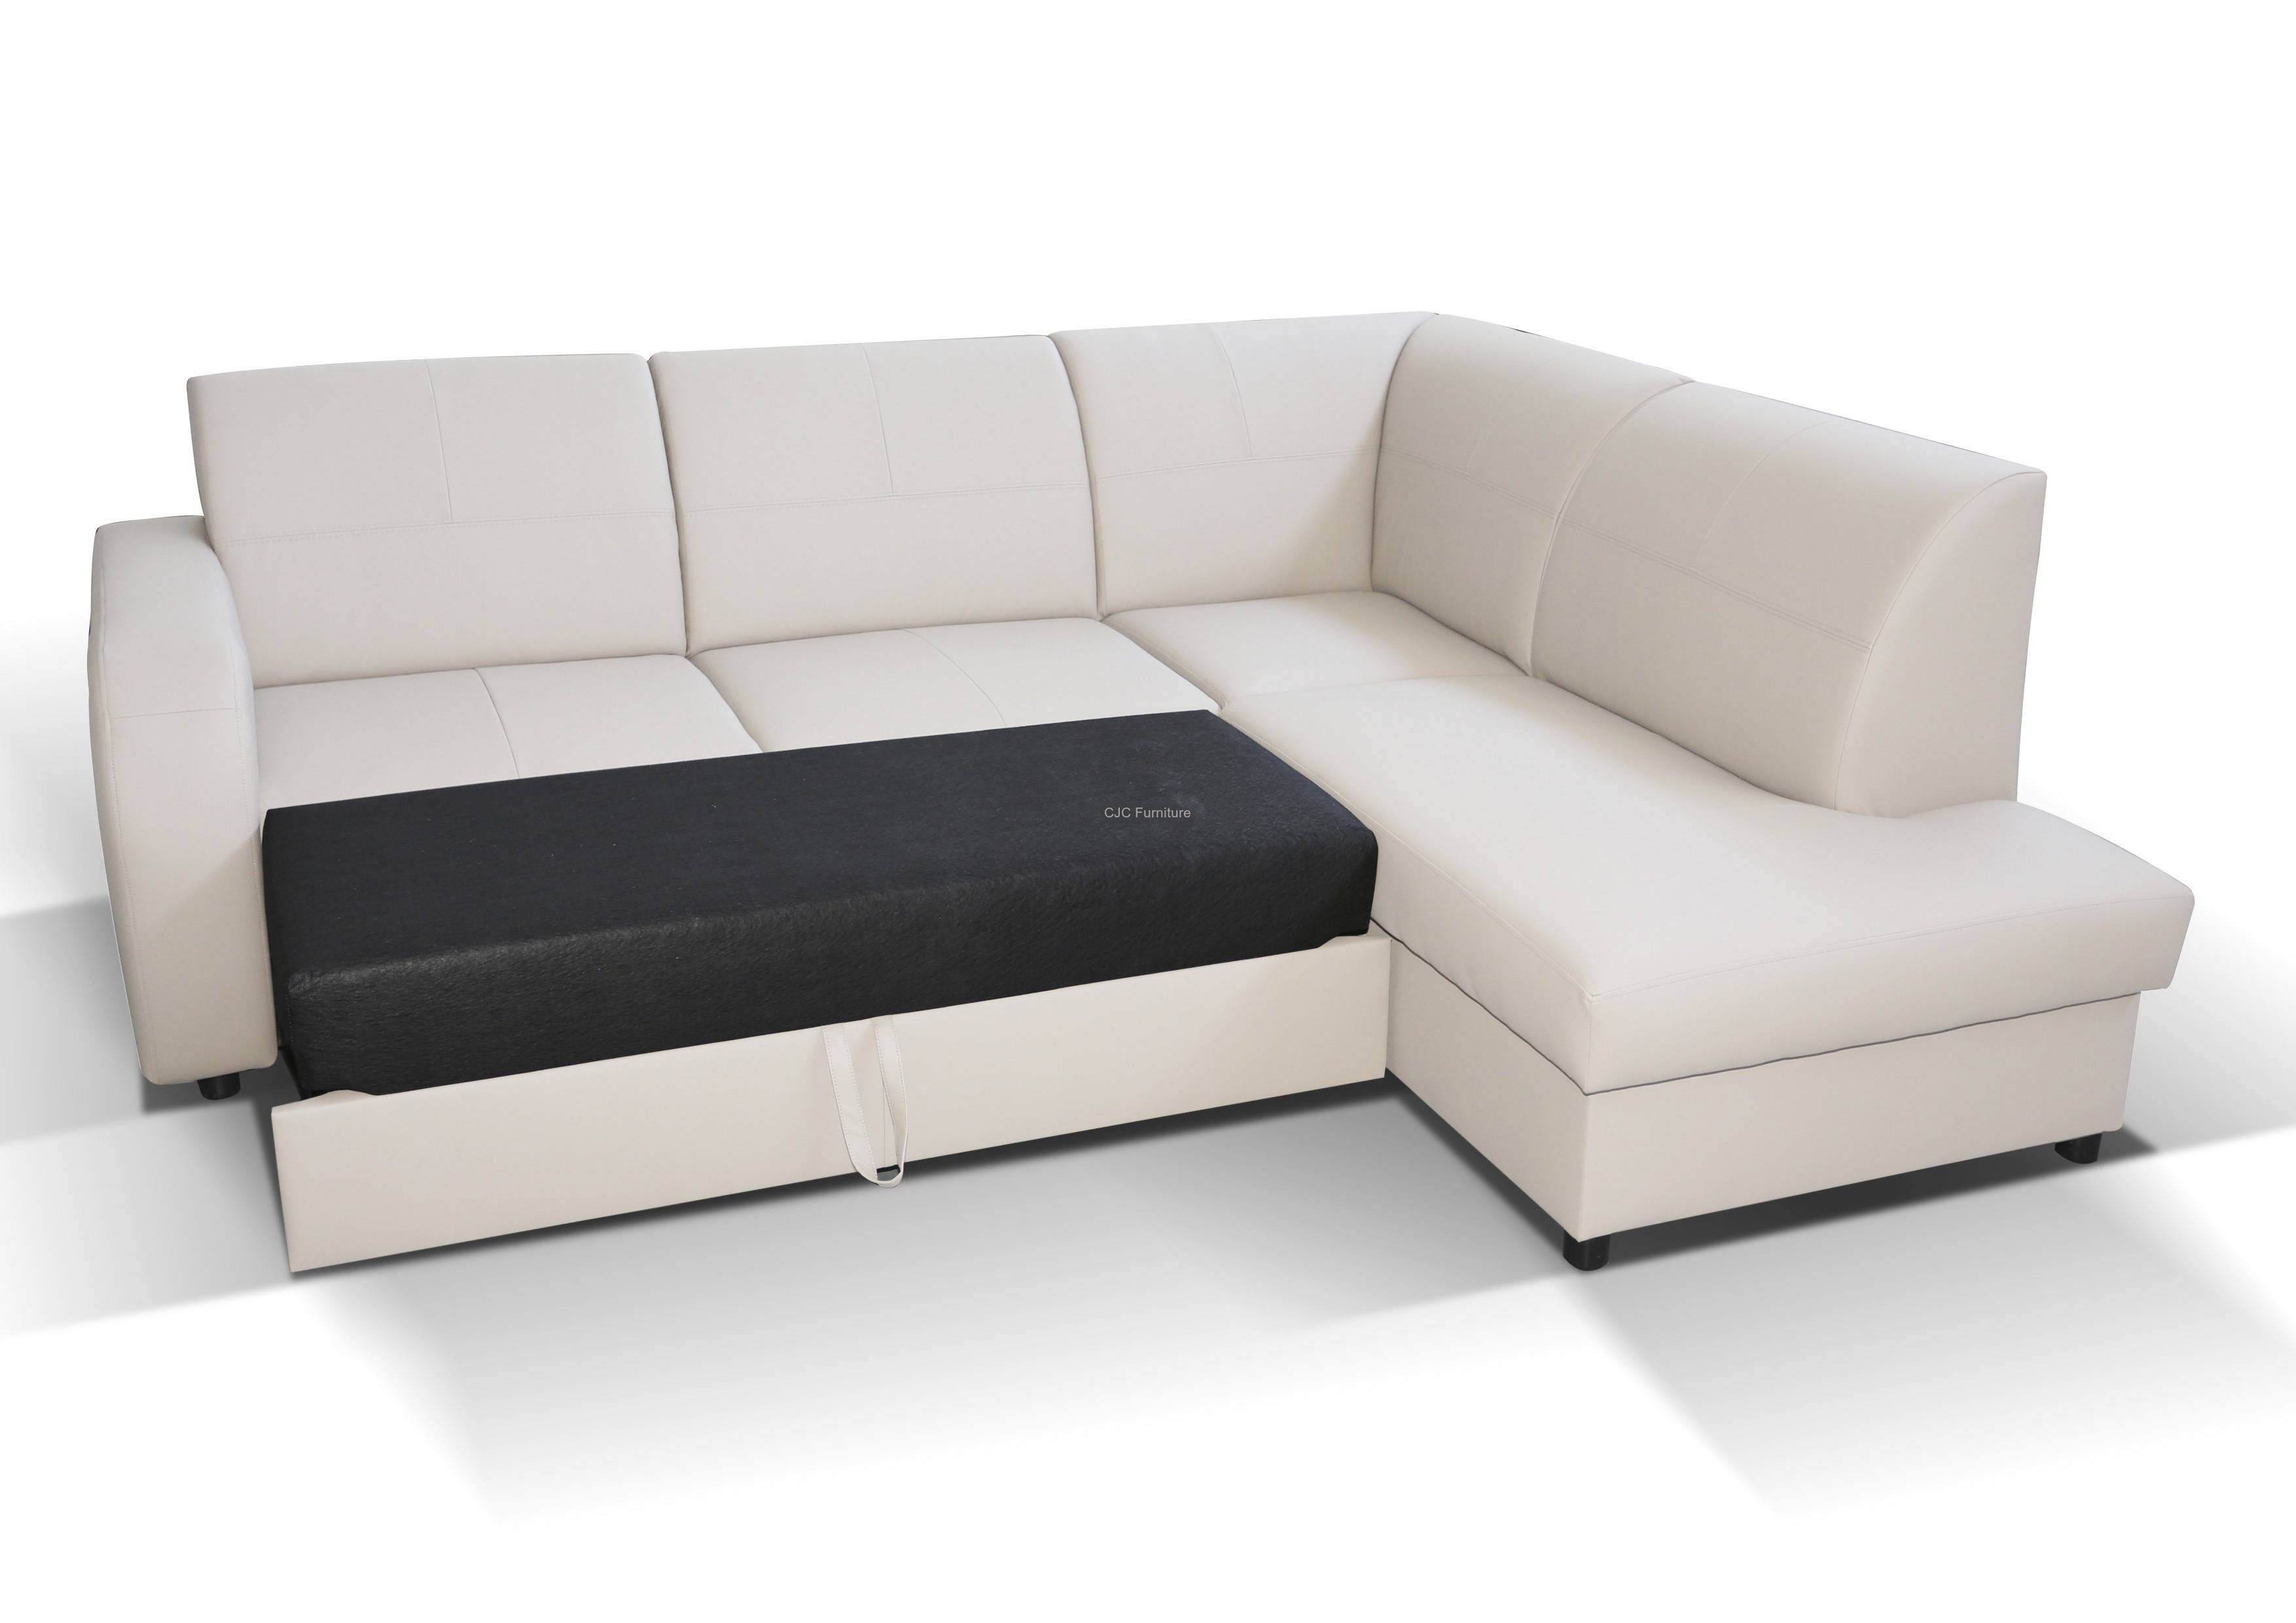 Small Corner Sofas Uk | Tehranmix Decoration Intended For Cheap Corner Sofas (View 24 of 30)